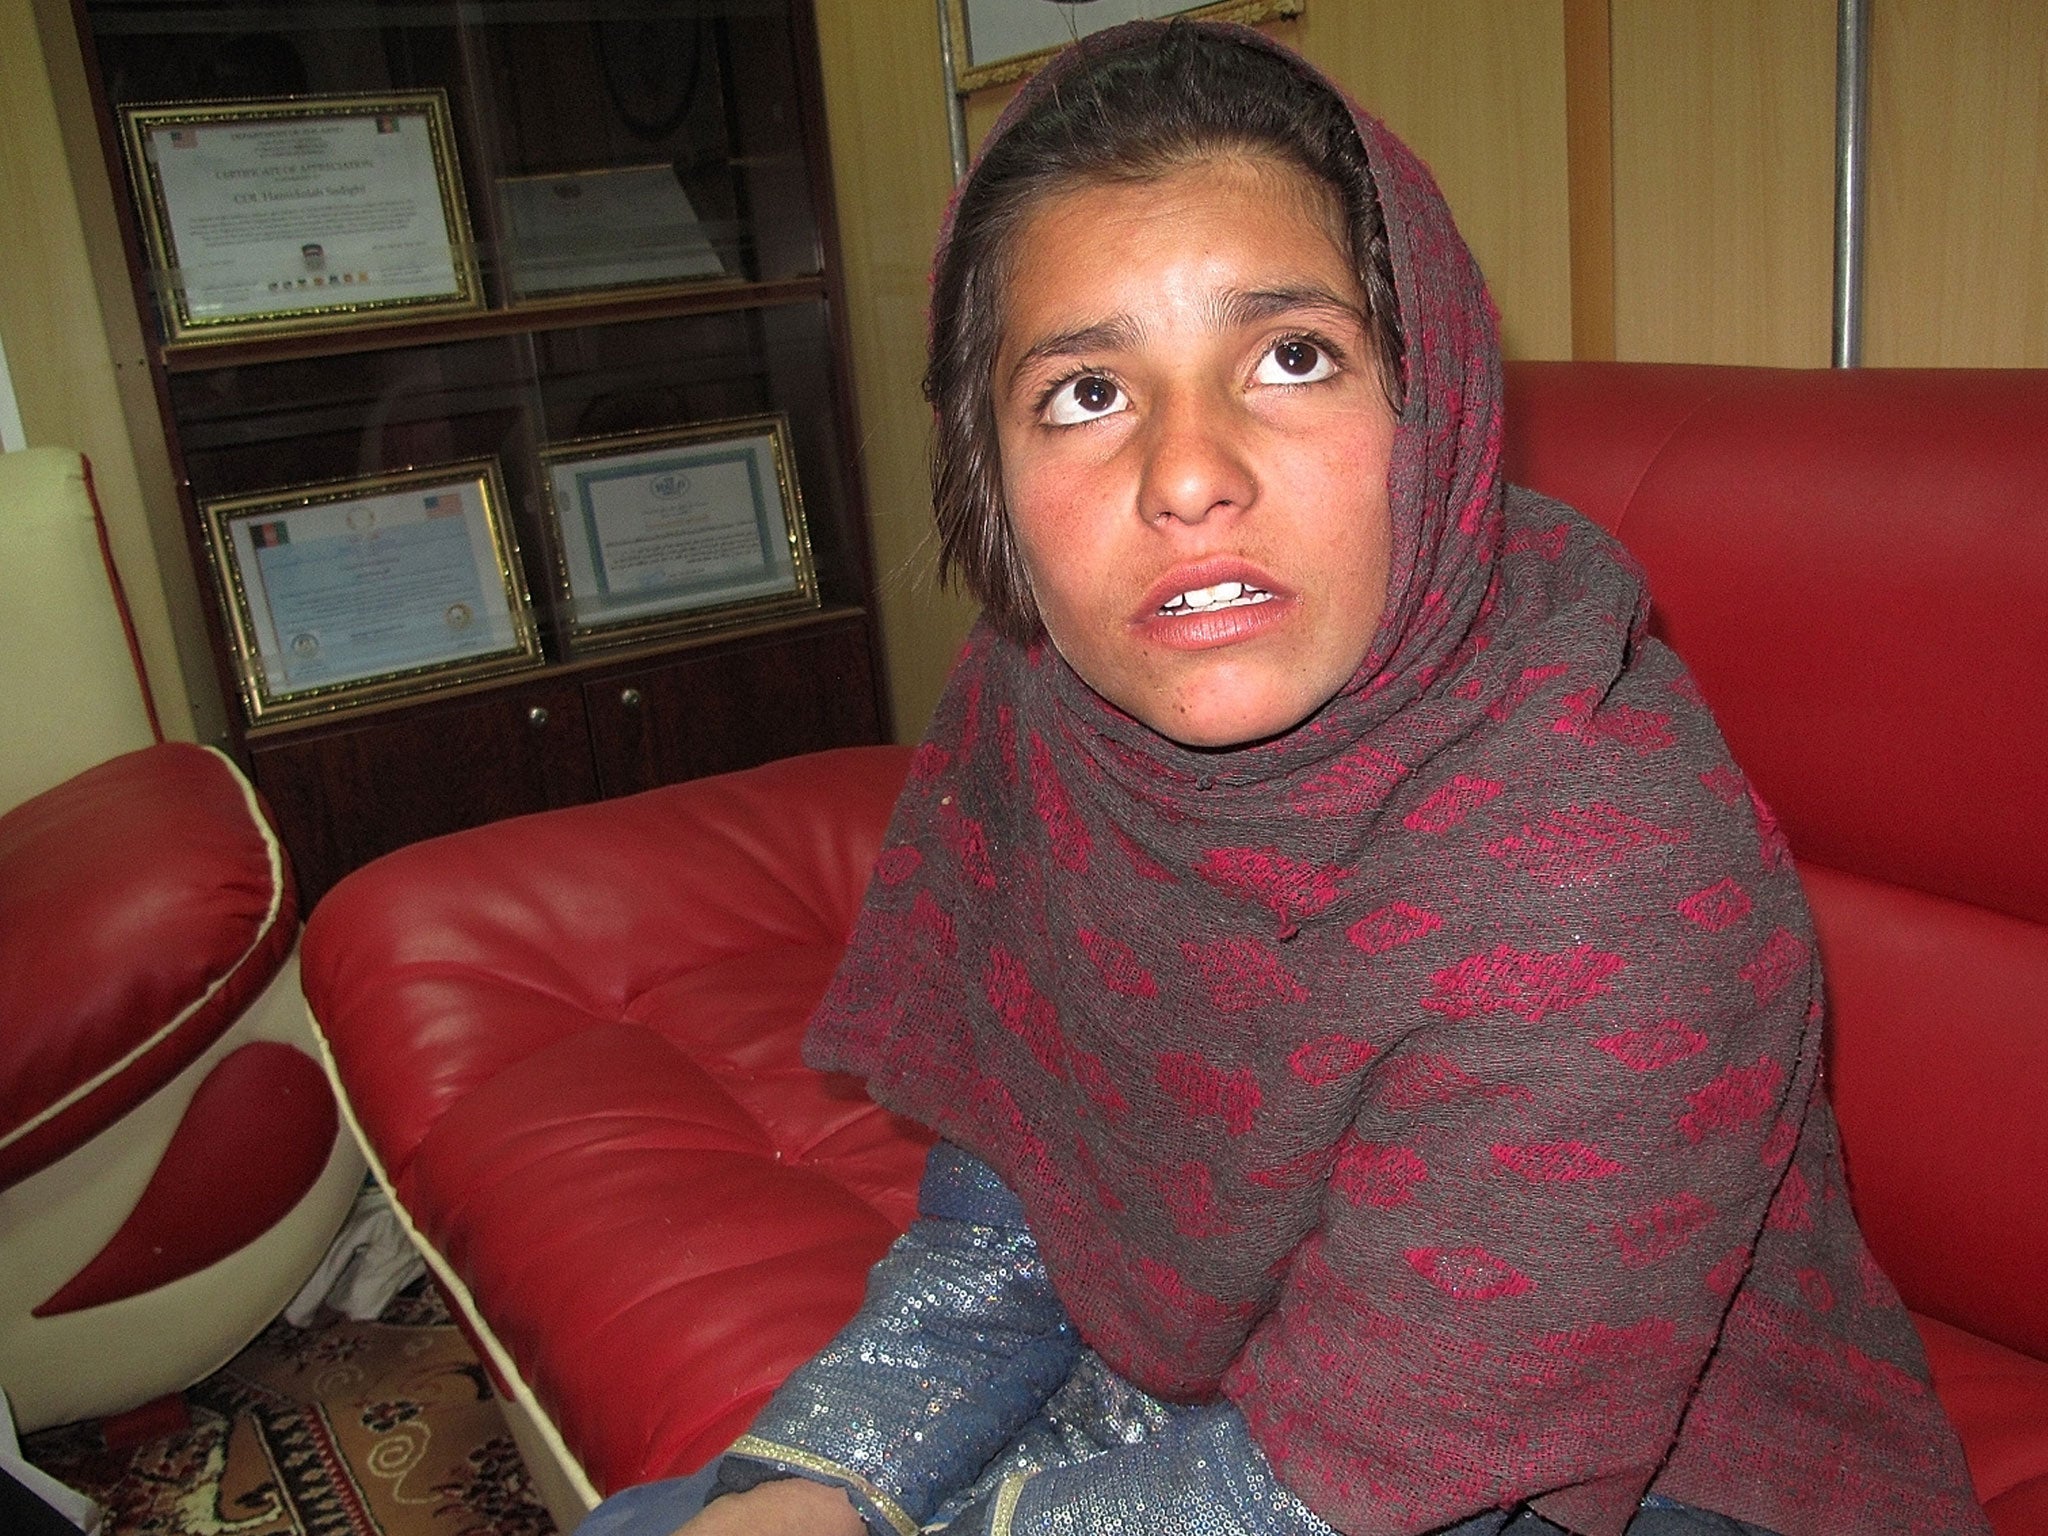 The Taliban deny using Spozhmai, aged 10, as a would-be suicide bomber